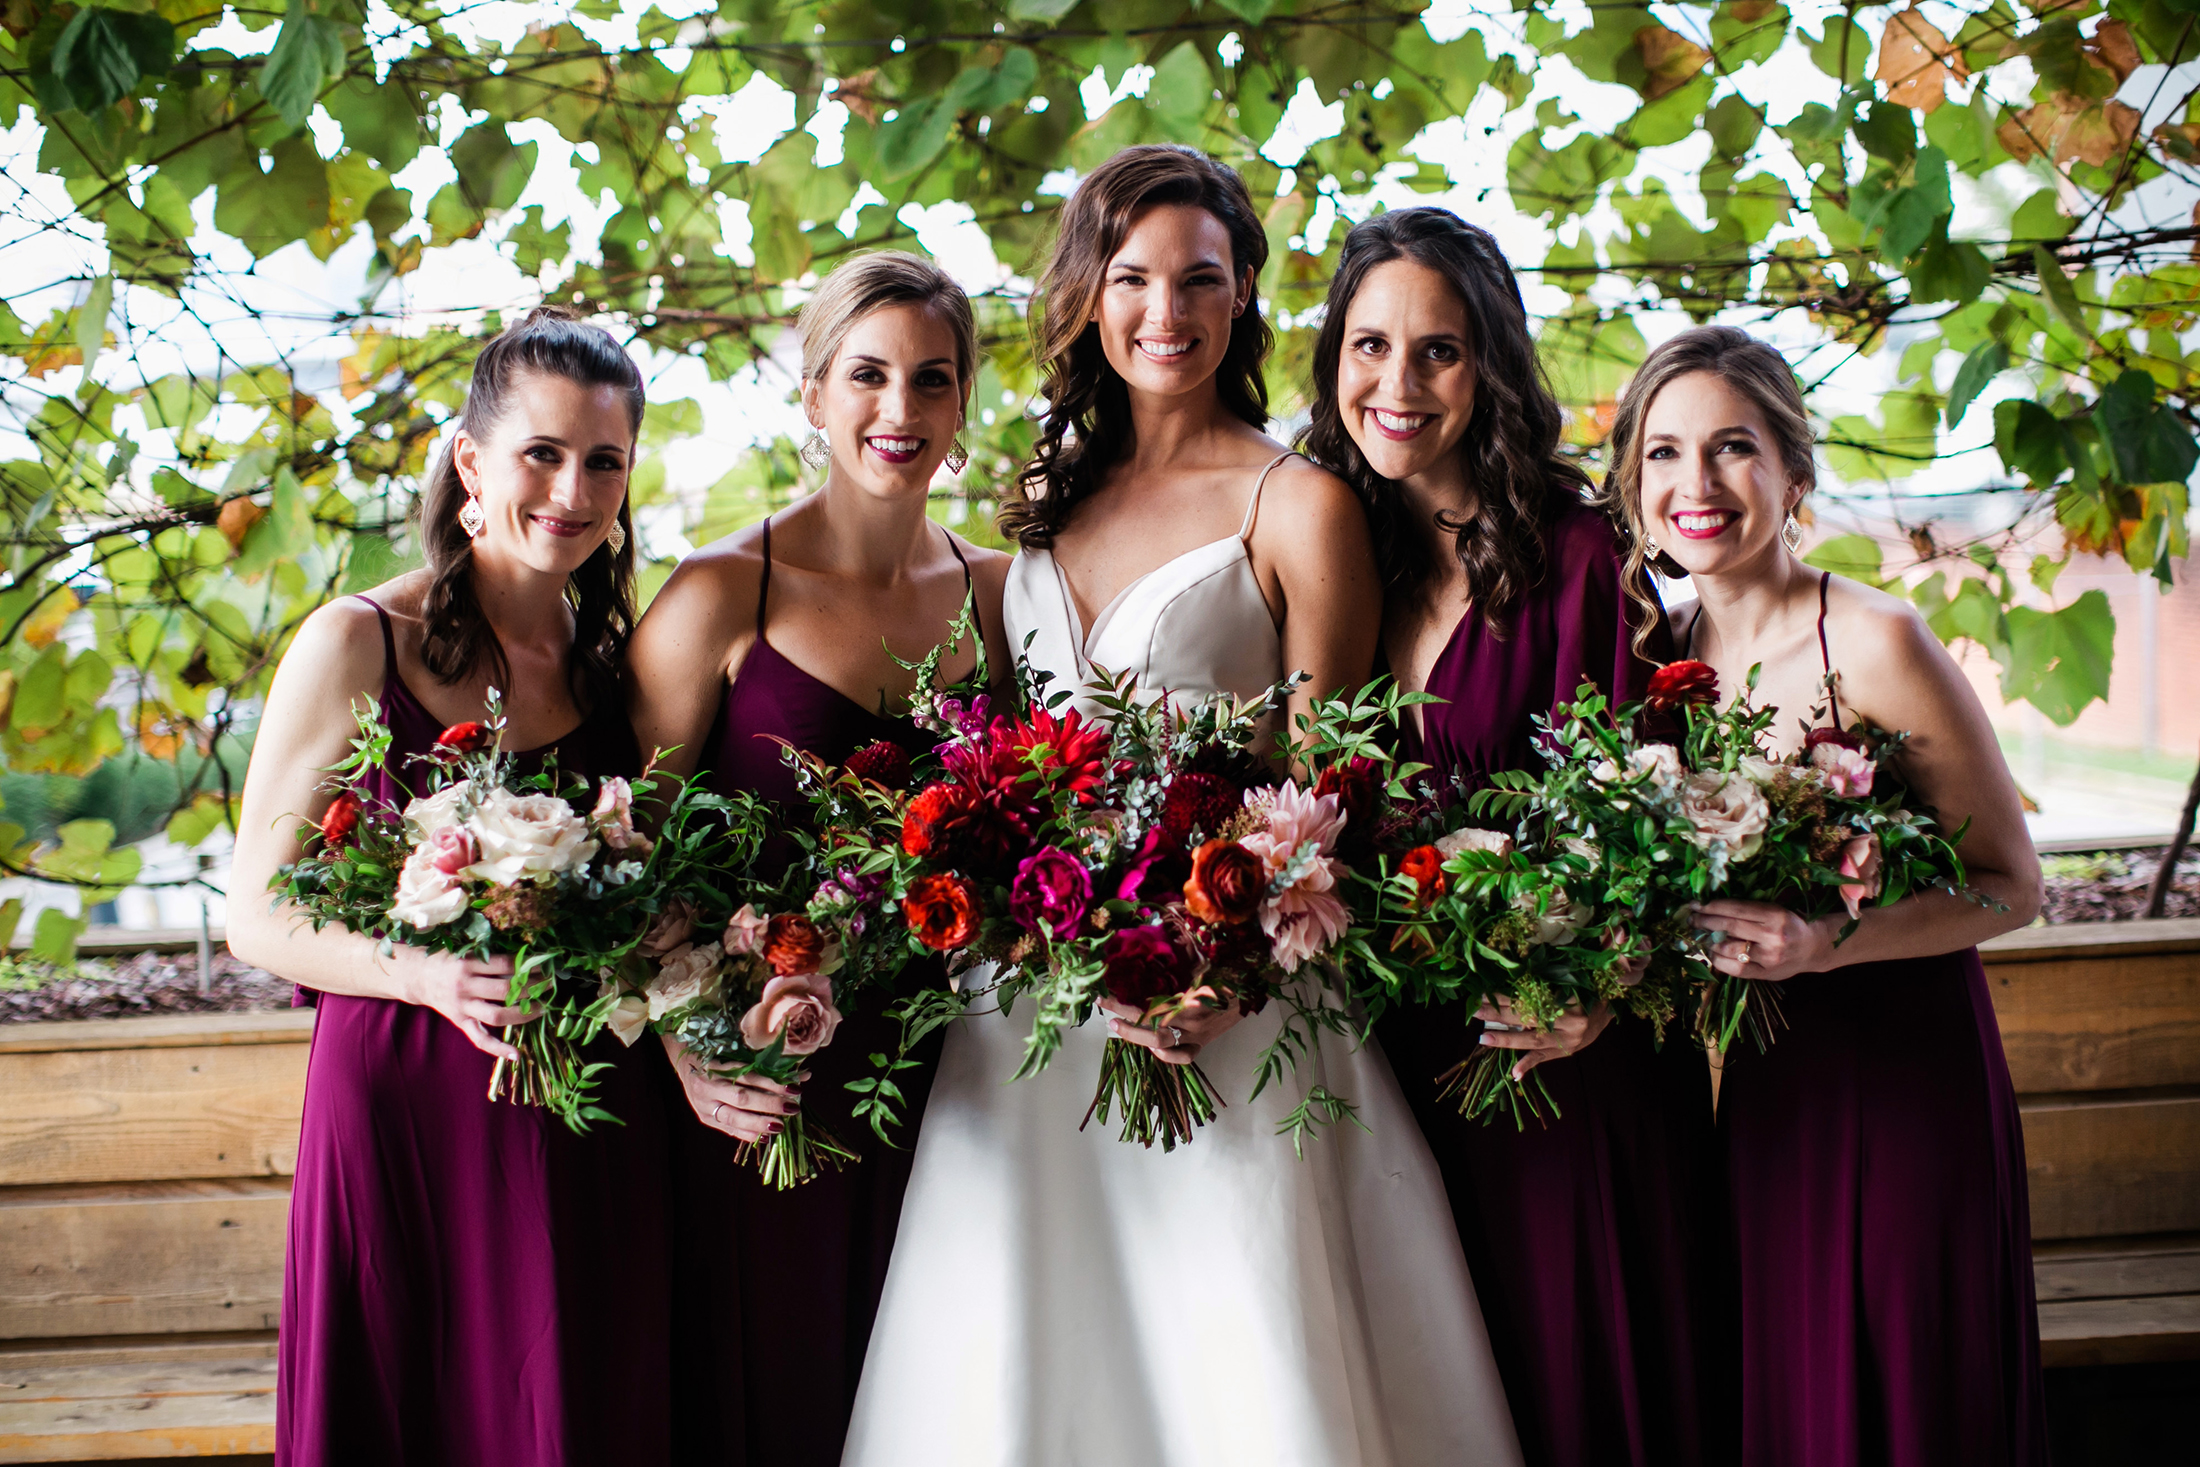 Bridesmaids in burgundy dresses with bouquets of marsala, blush, and greenery / Nashville Wedding Florist